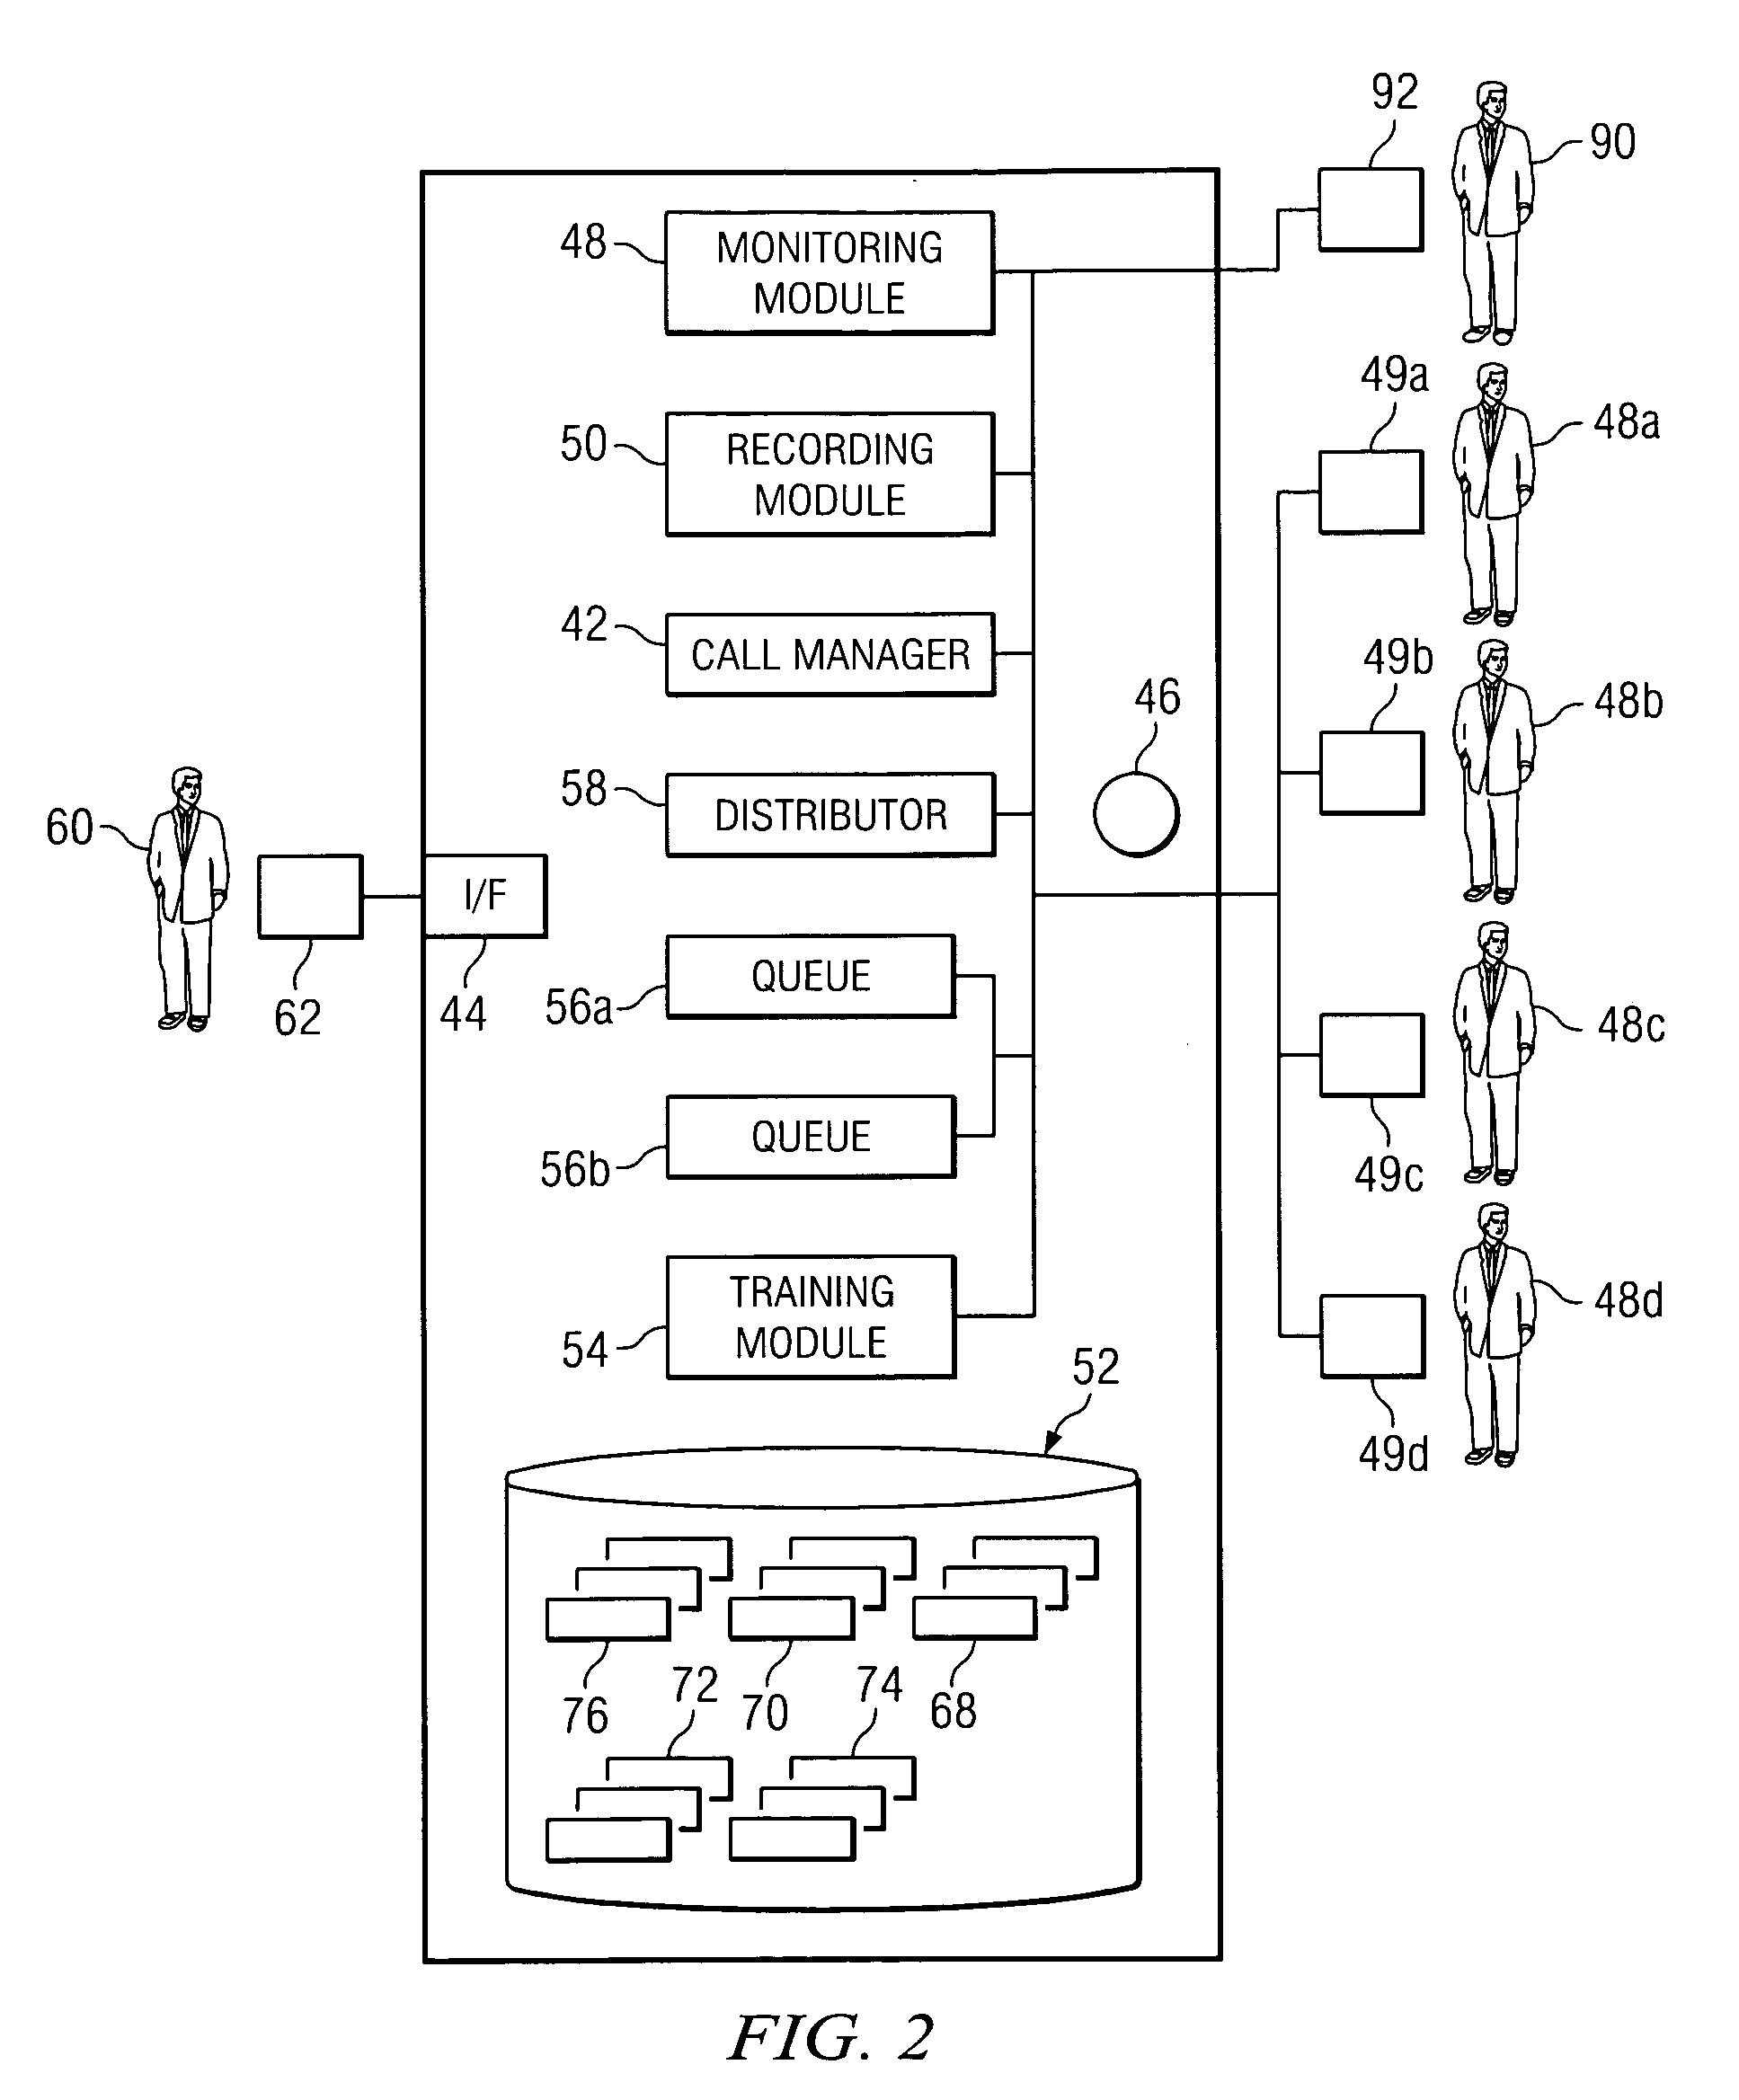 Method and system for providing agent training